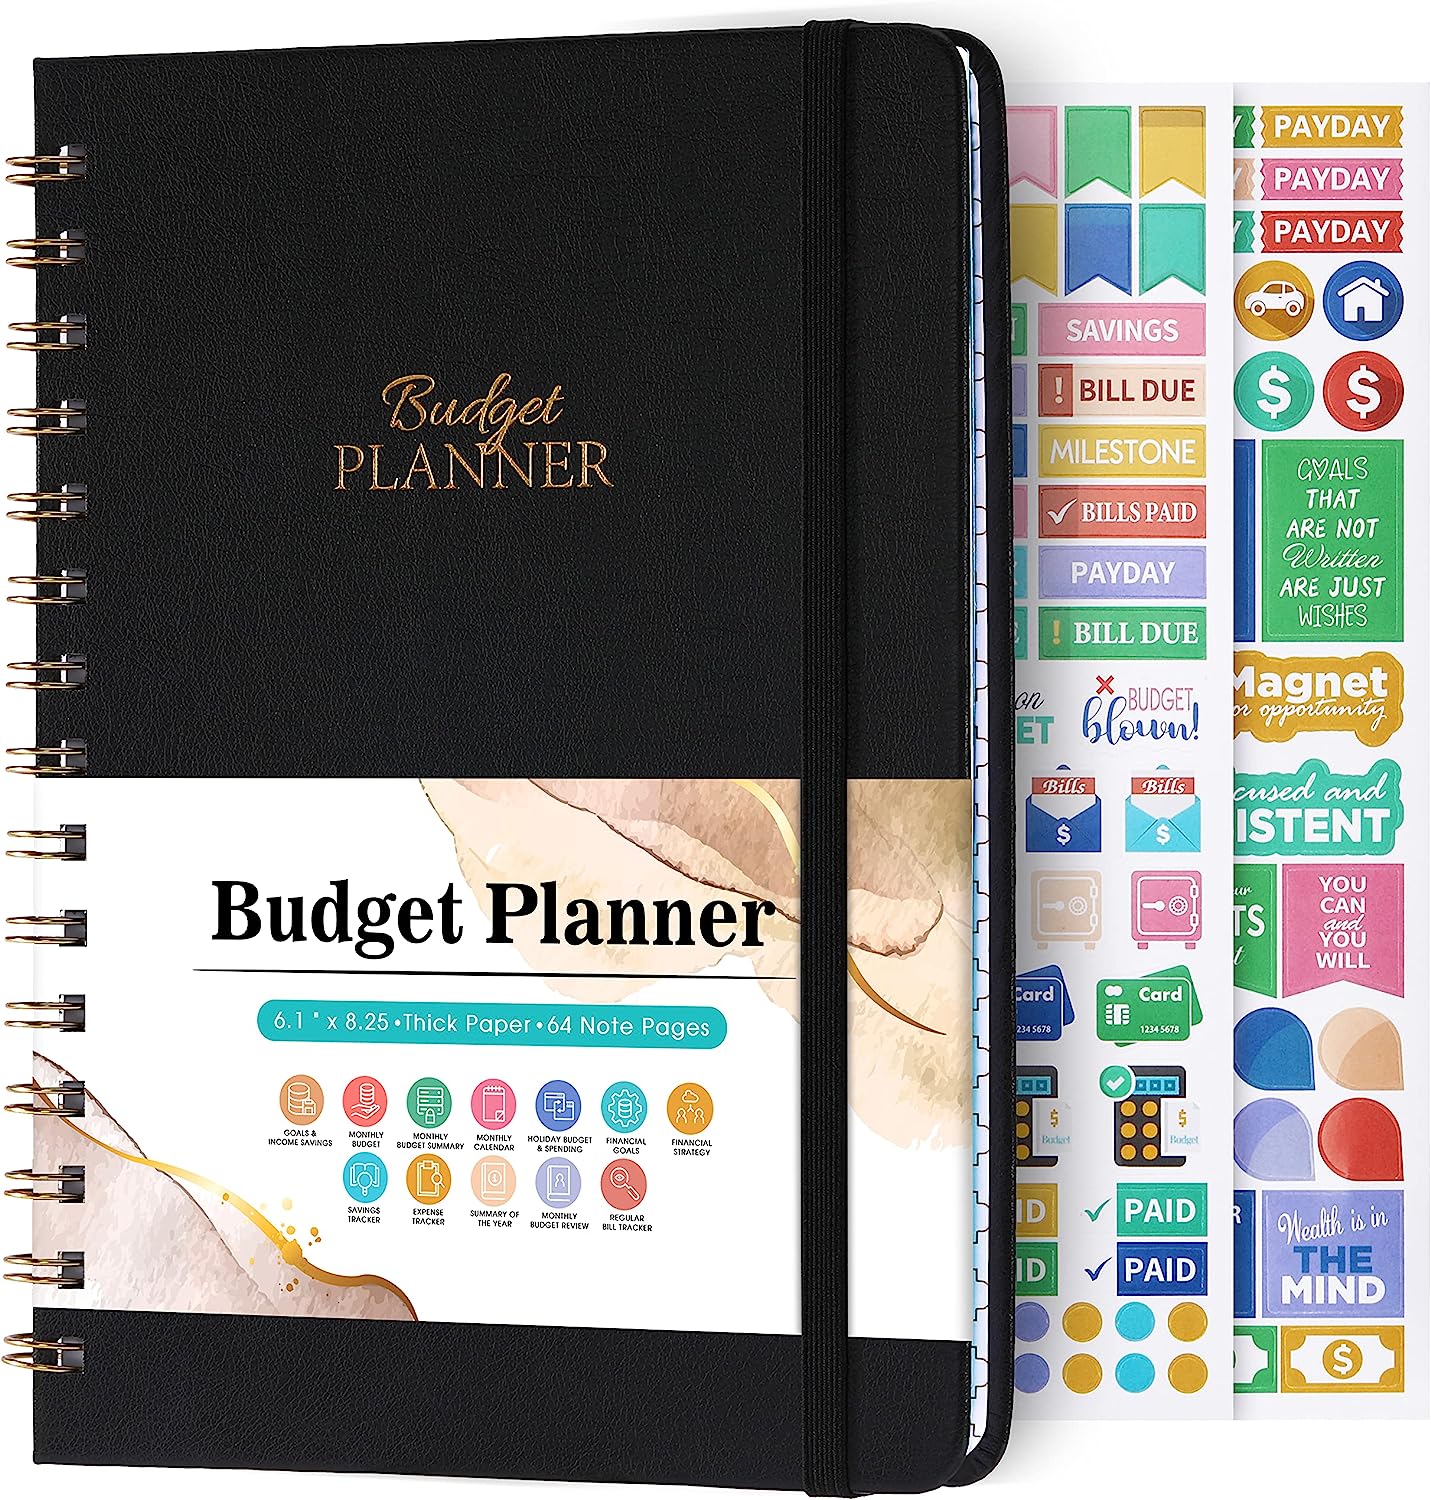 Budget Planner - Budget Book with Bill Organizer and [...]